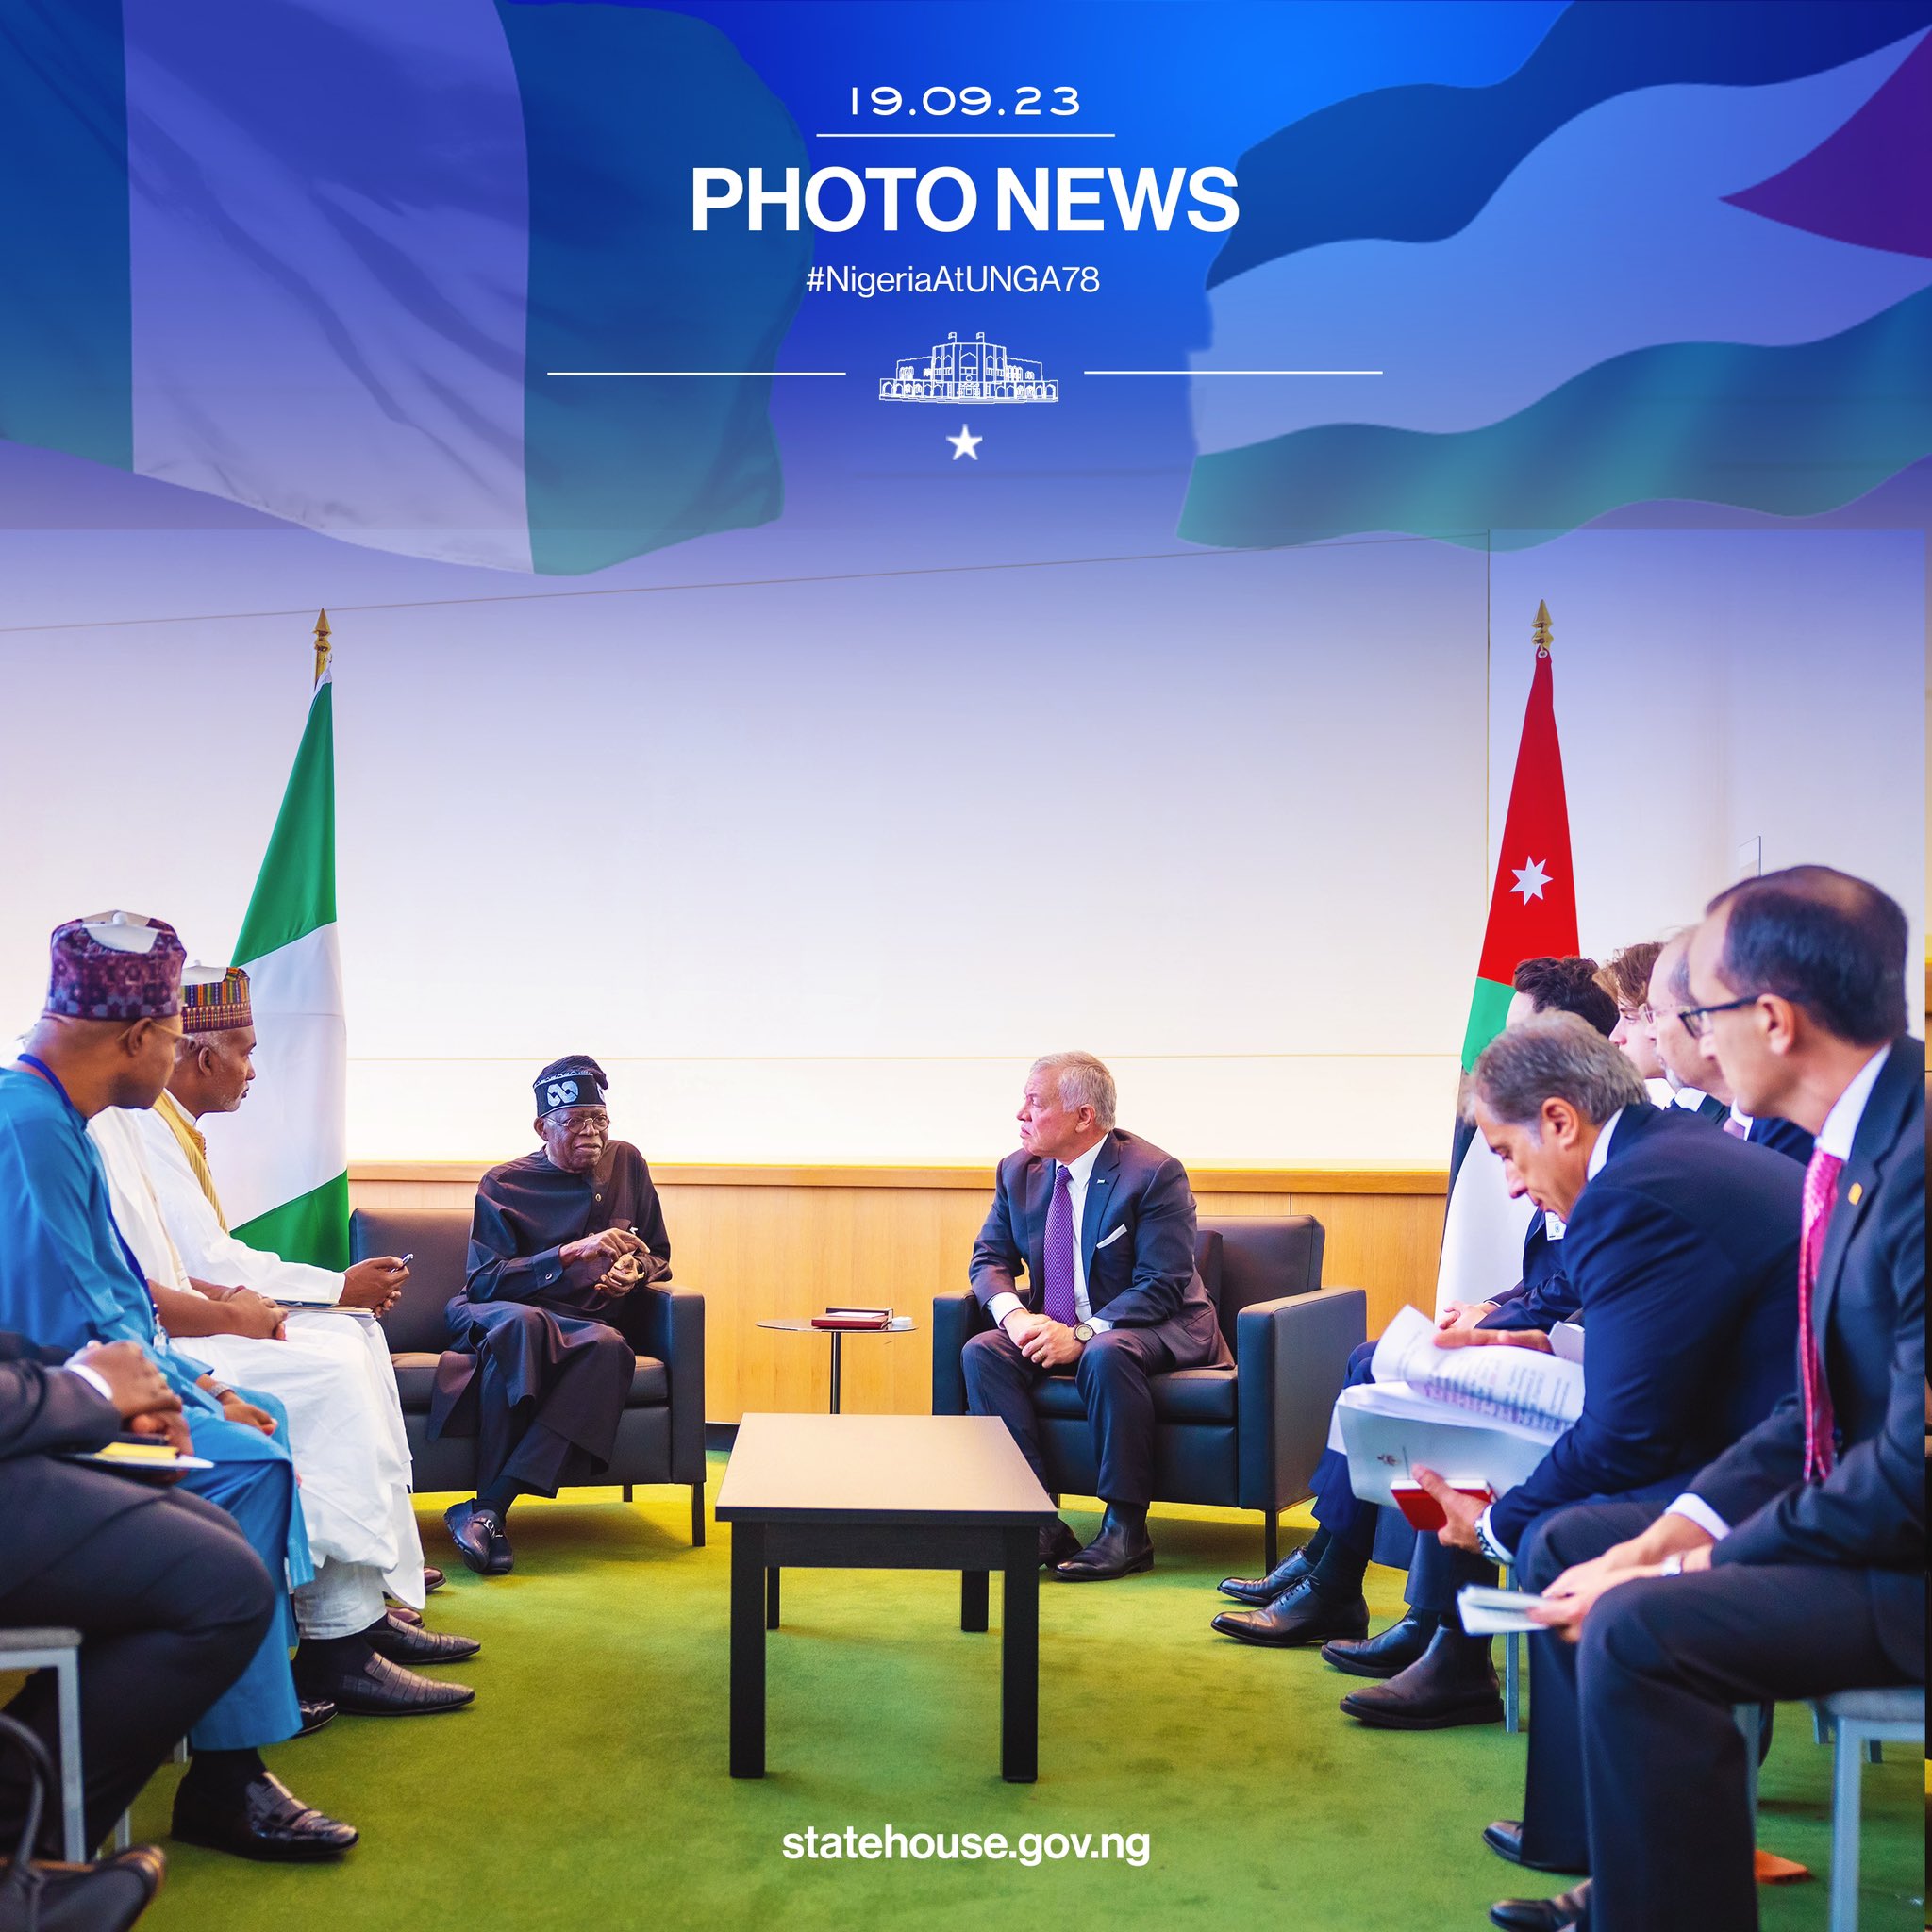 Photo News: President Bola Tinubu @officialABAT in a bilateral meeting with King Abdullah II ibn Al Hussein, King Of Jordan on the sidelines of the ongoing United Nations 78th General Assembly. #PBATatUNGA78 #NigeriaAtUNGA78 #UNGA78